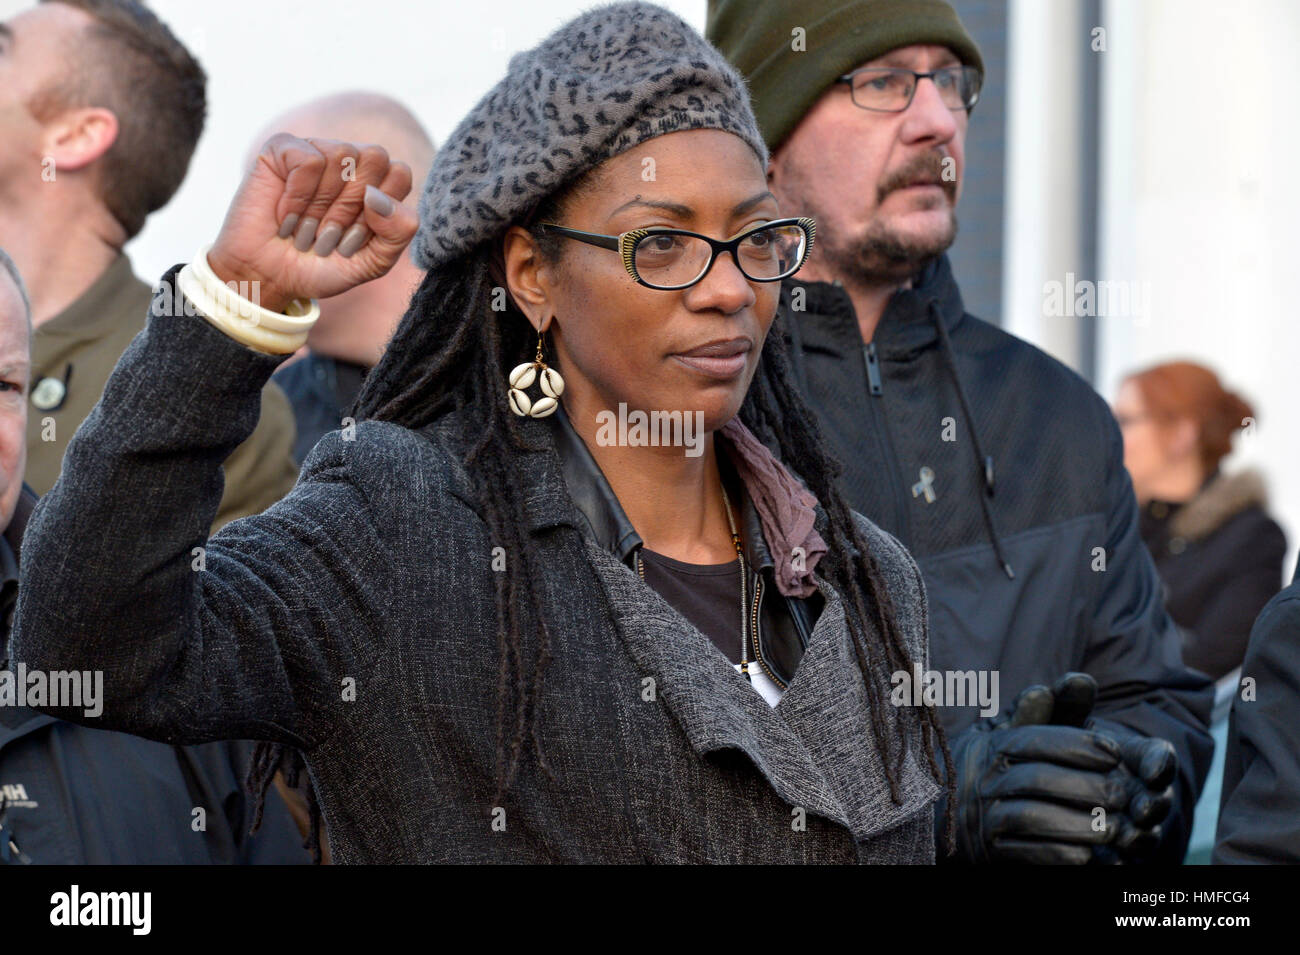 Marcia Rigg, who lost her brother Sean Rigg on 21 August 2008 in police custody in Brixton, at the 45th Bloody Sunday March for Justice in Derry, Lond Stock Photo